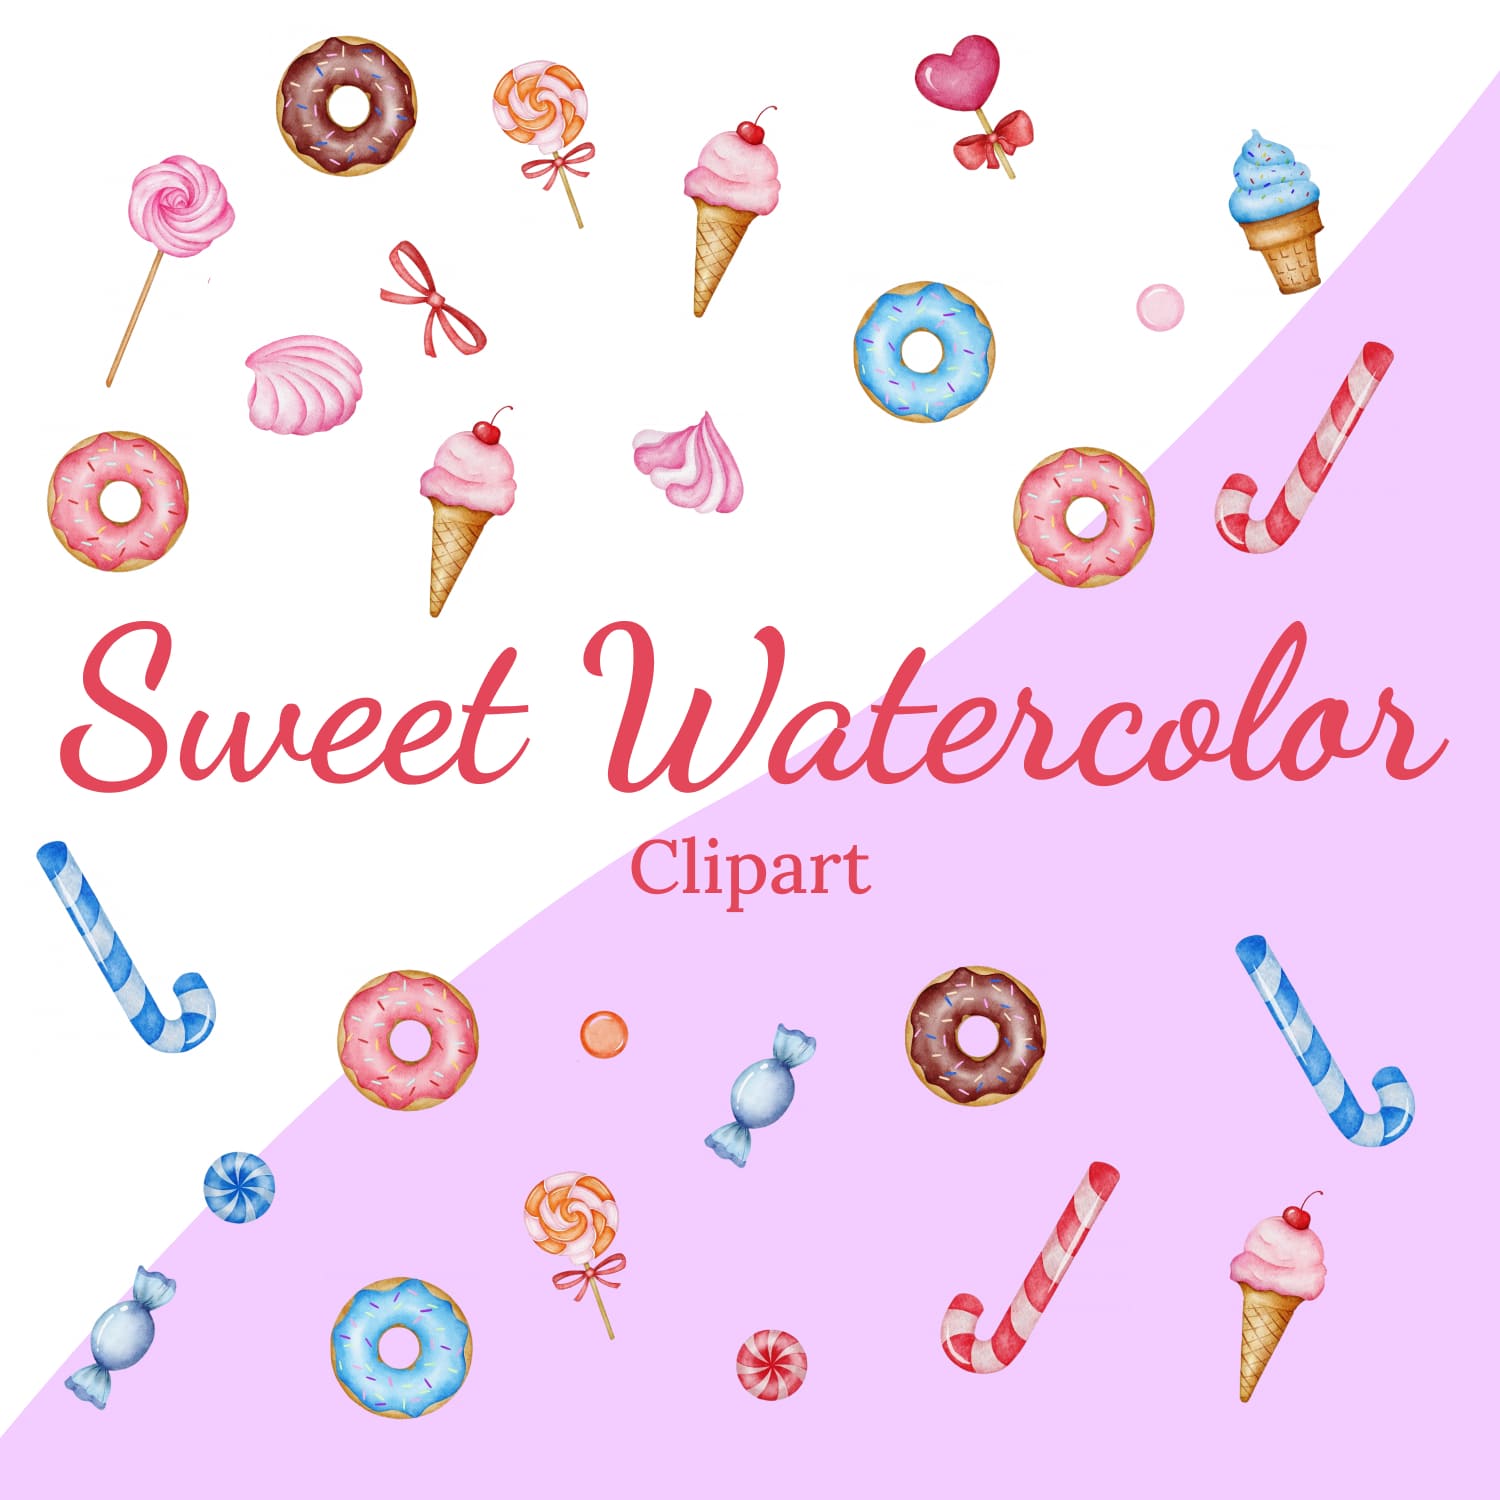 Sweet Watercolor Clipart.